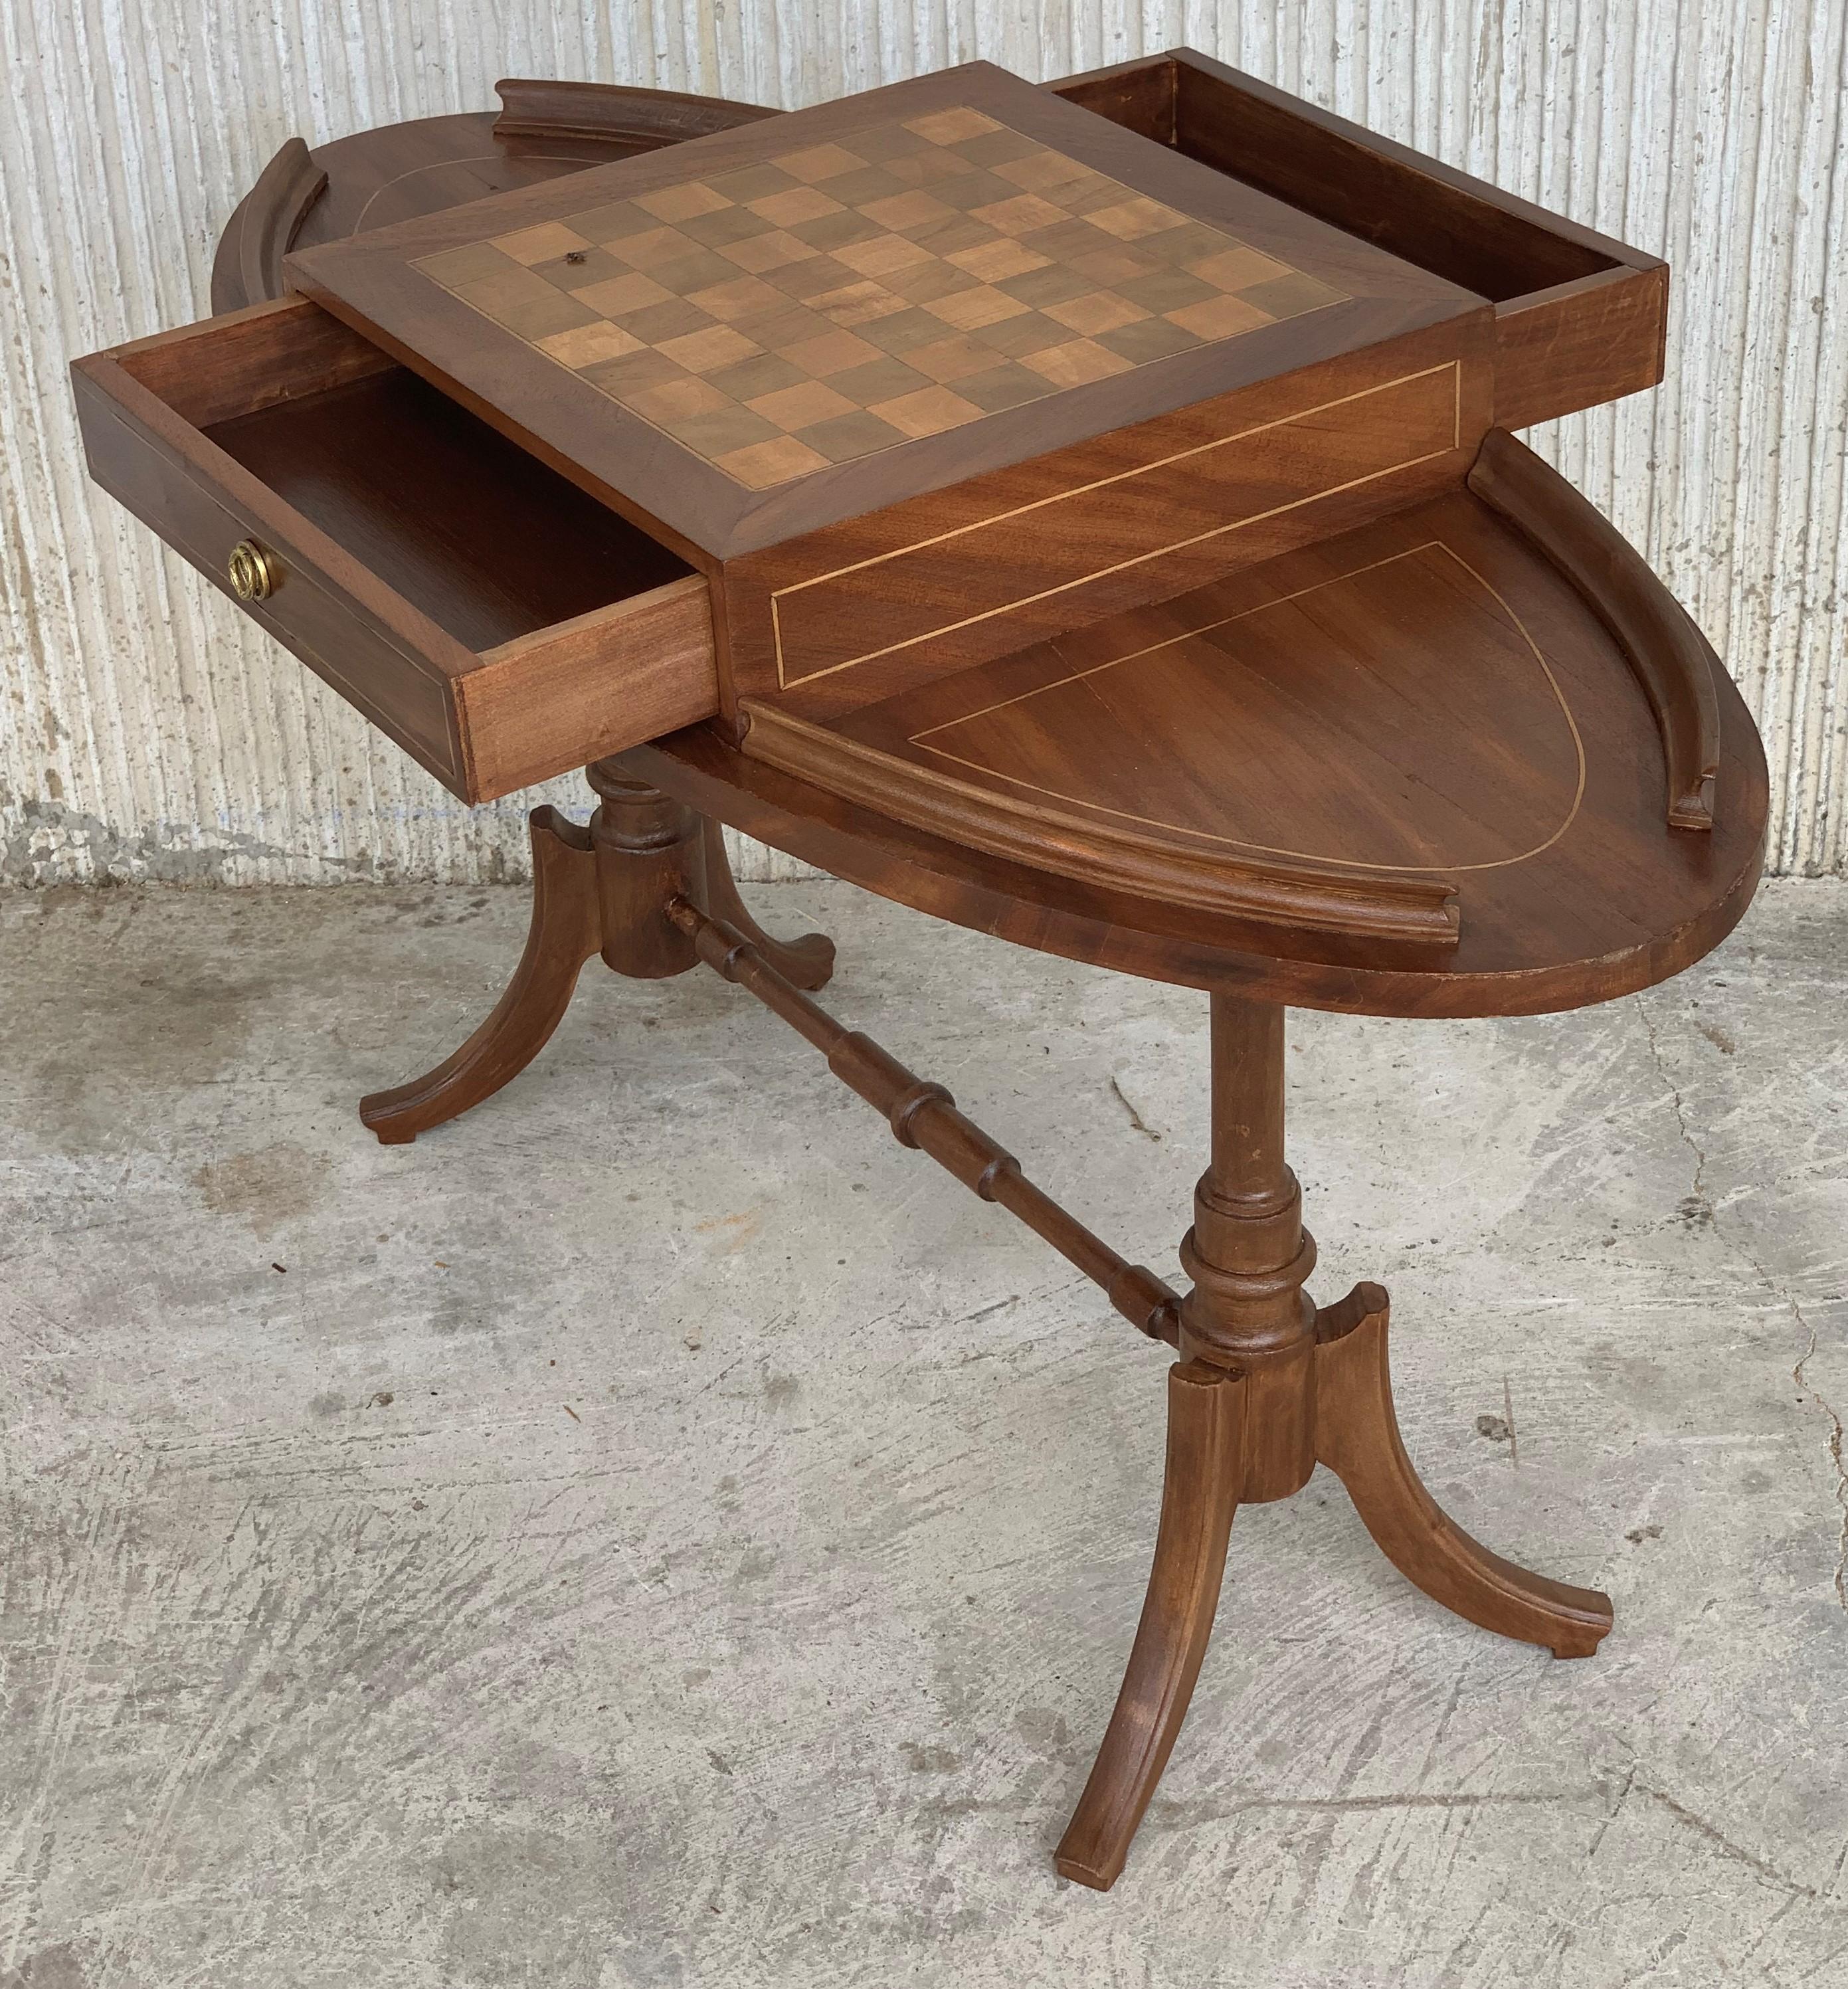 20th Century Regency Style Oval Walnut Chess Game Table with Two Drawers In Good Condition For Sale In Miami, FL